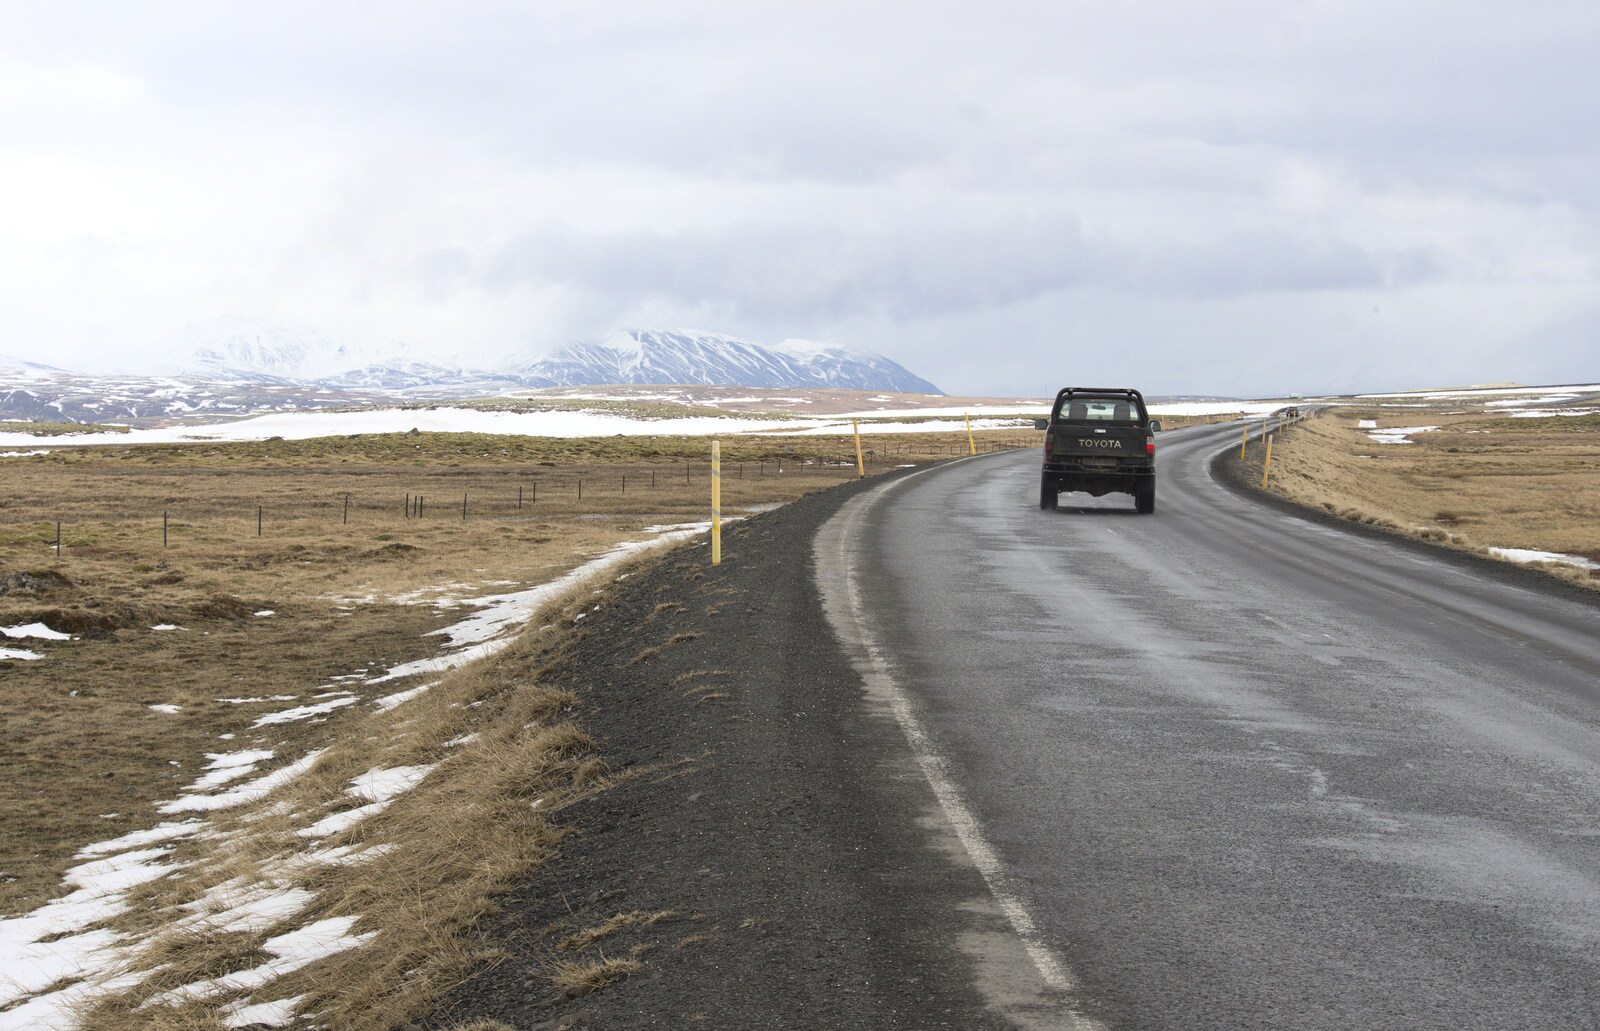 A 4x4 heads off to the mountains from The Golden Circle of Ísland, Iceland - 22nd April 2017